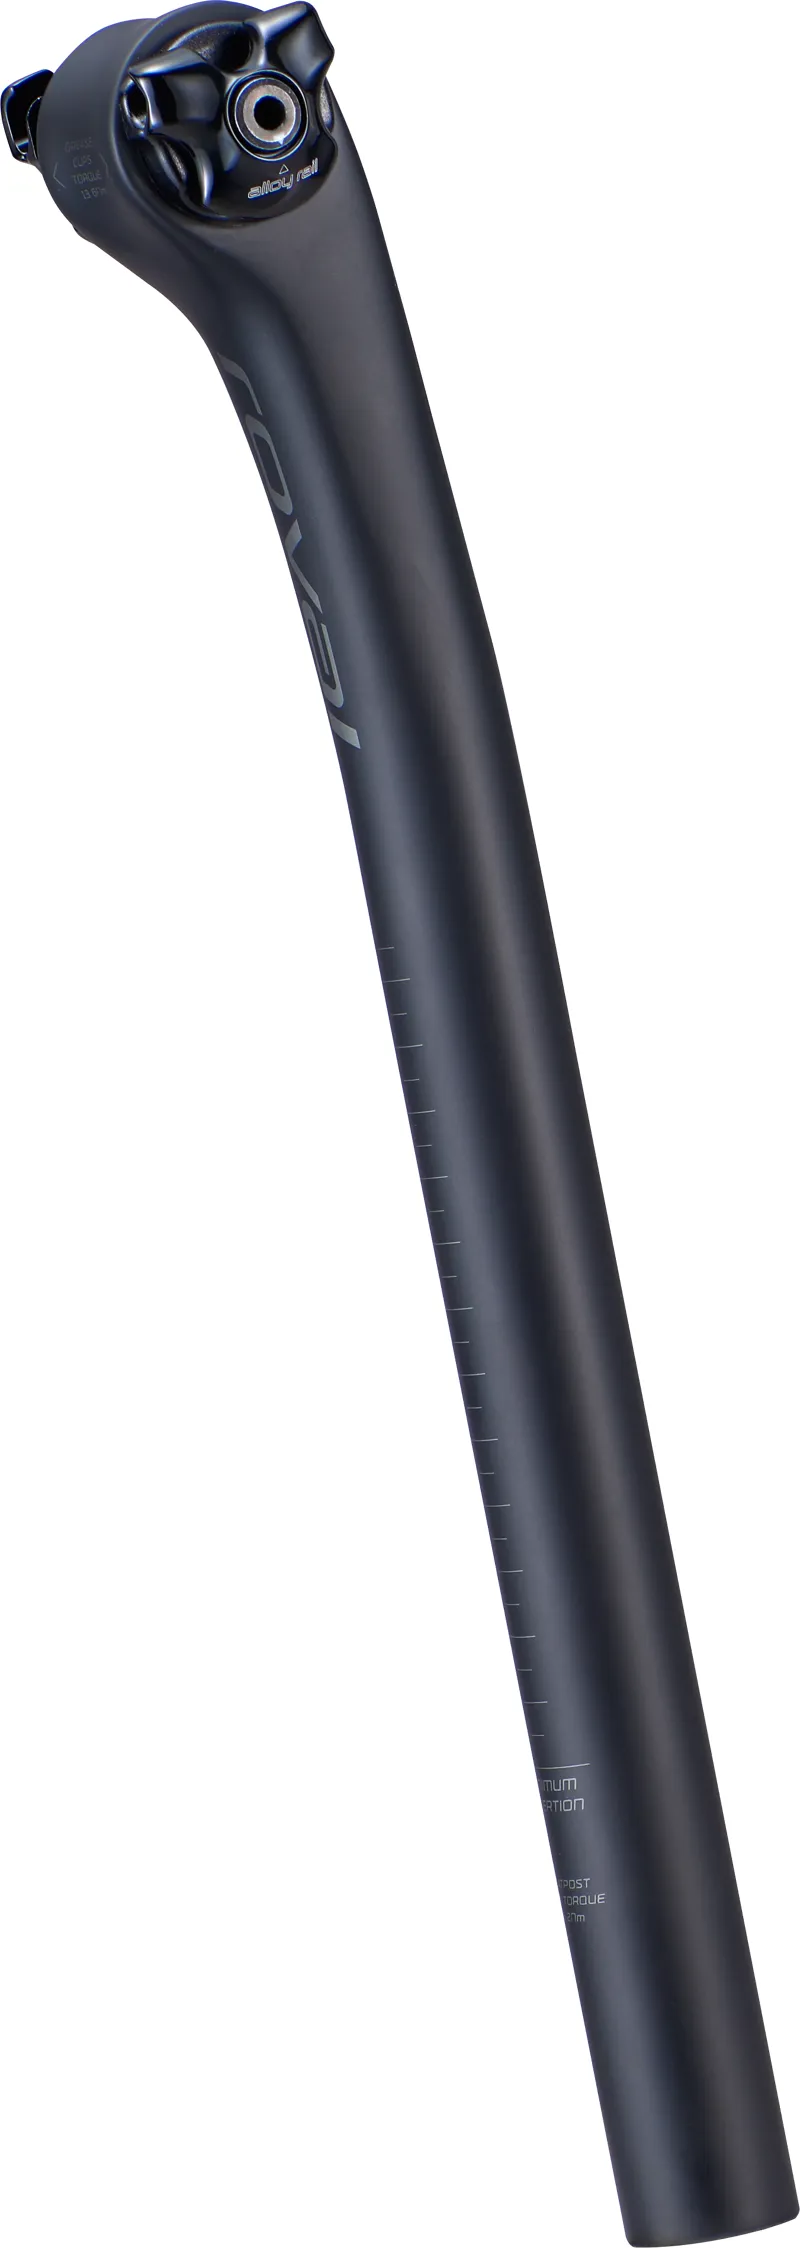 Specialized Terra 27.2mm Carbon Seatpost in Black